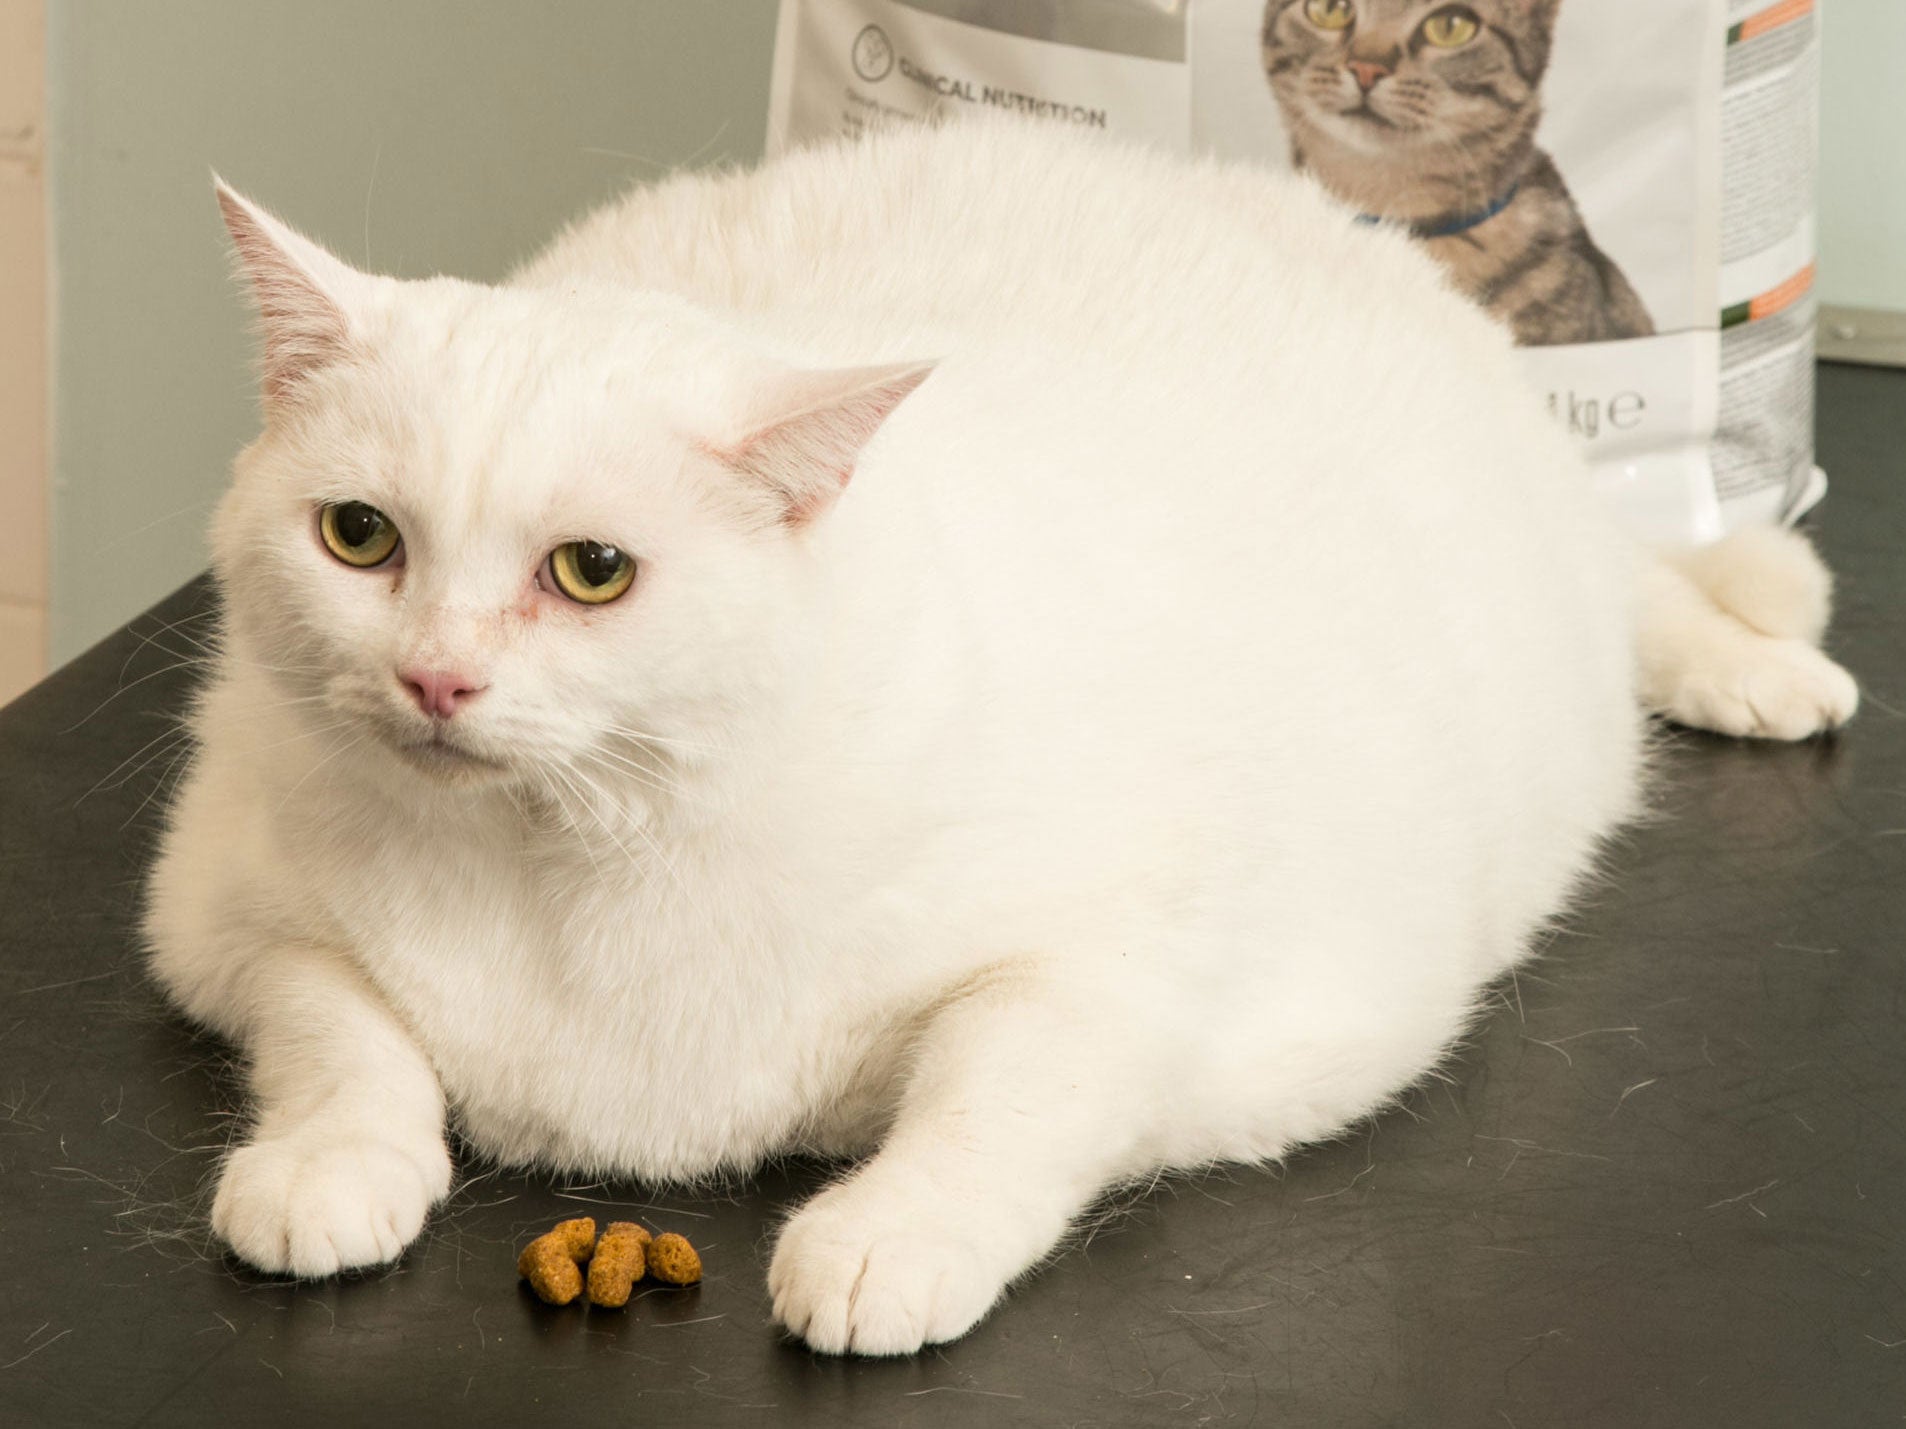 Guy, a fat cat who is more than twice his healthy weight, will take part in this year's PDSA Pet Fit Club competition